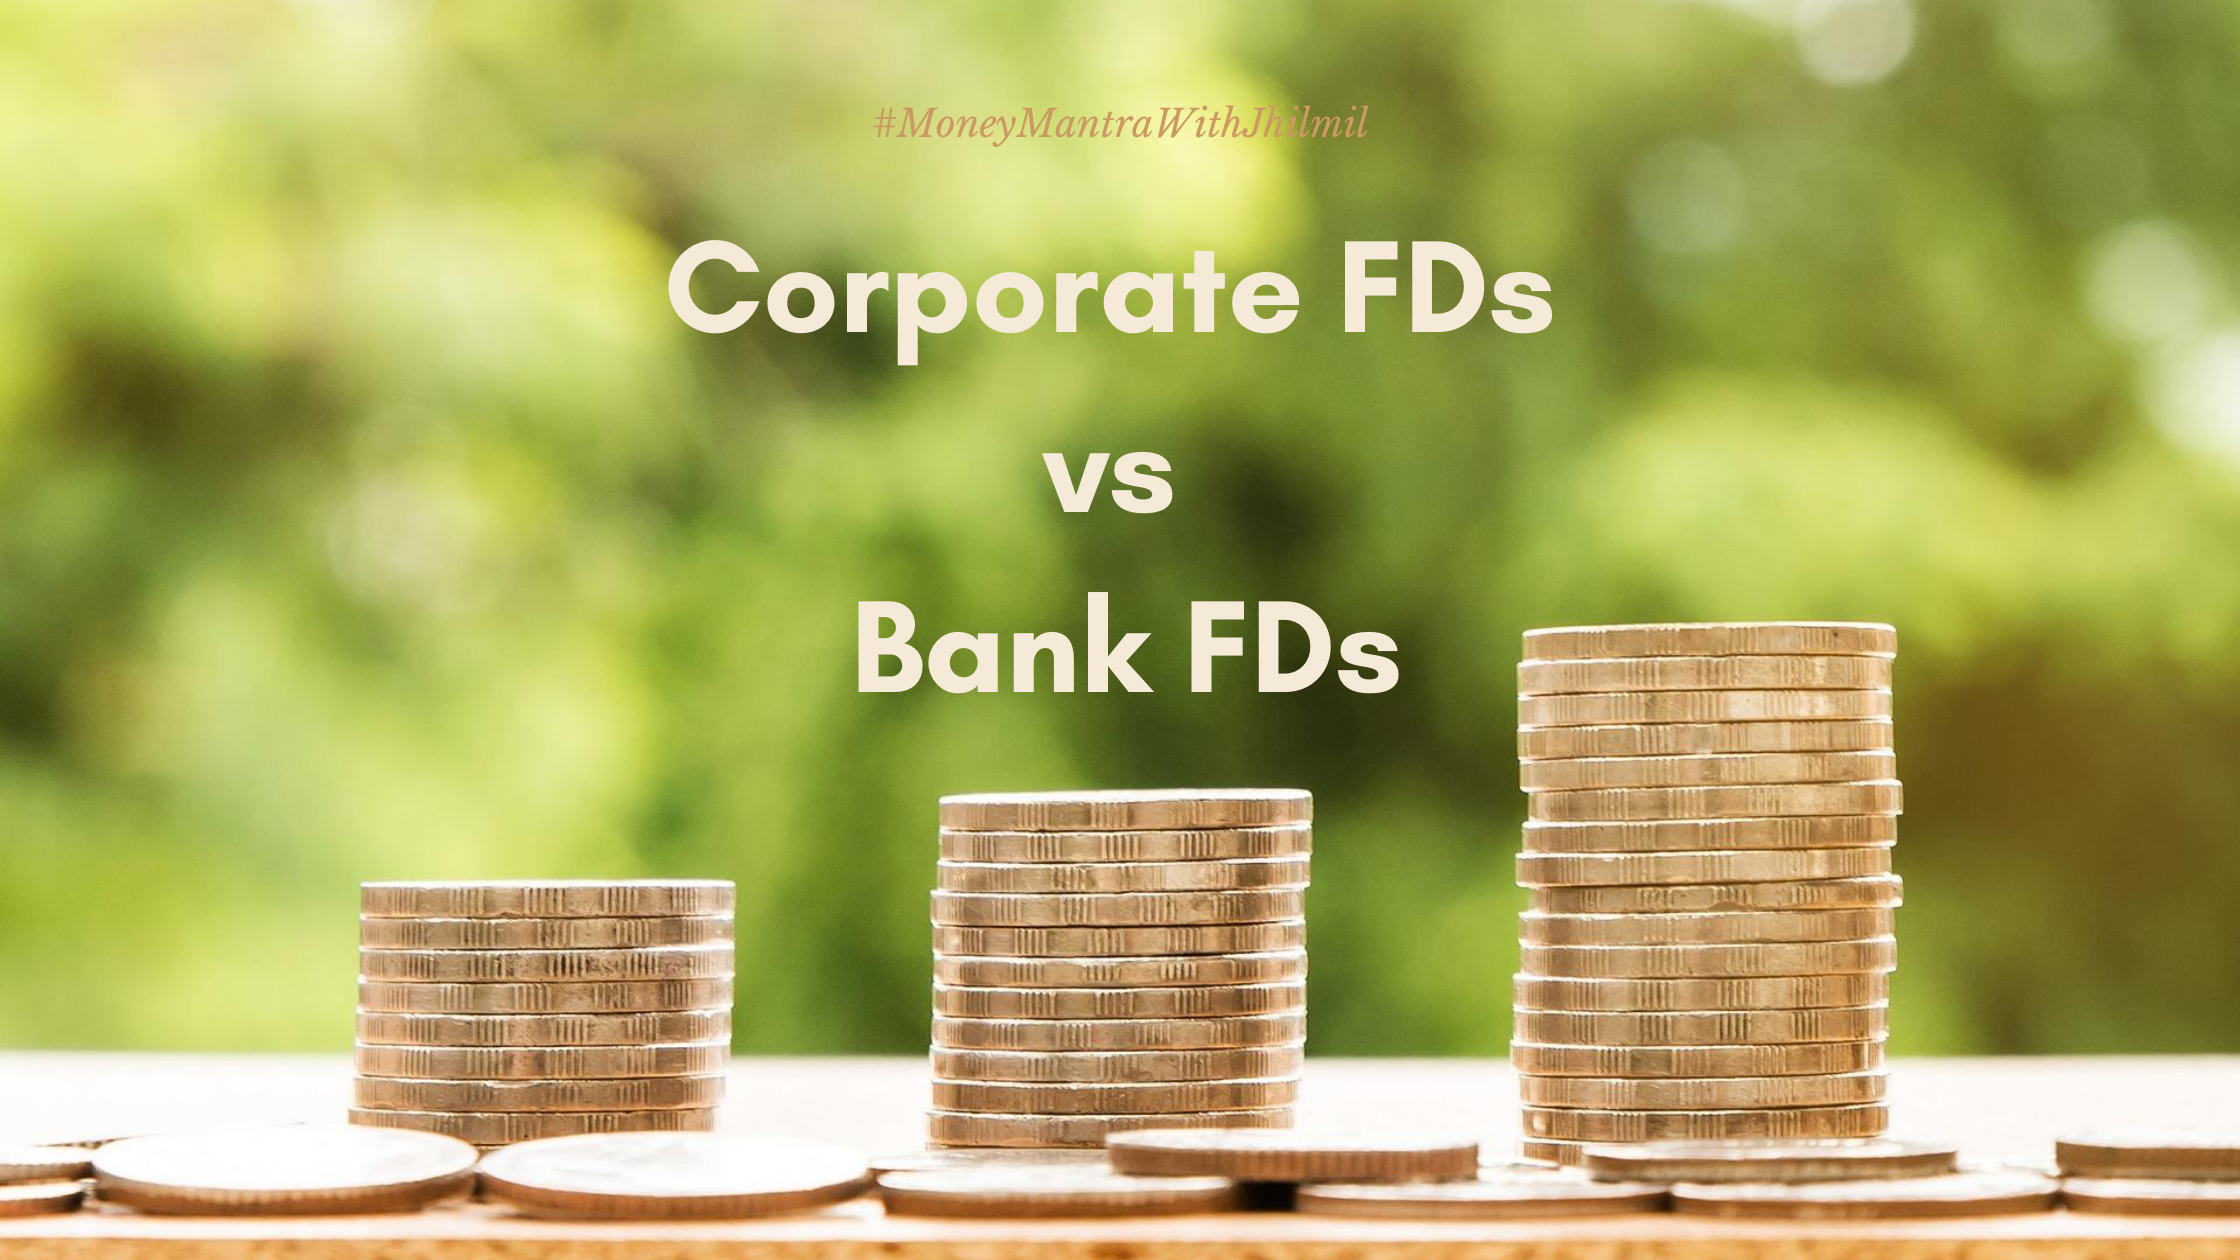 What are Corporate FDs?